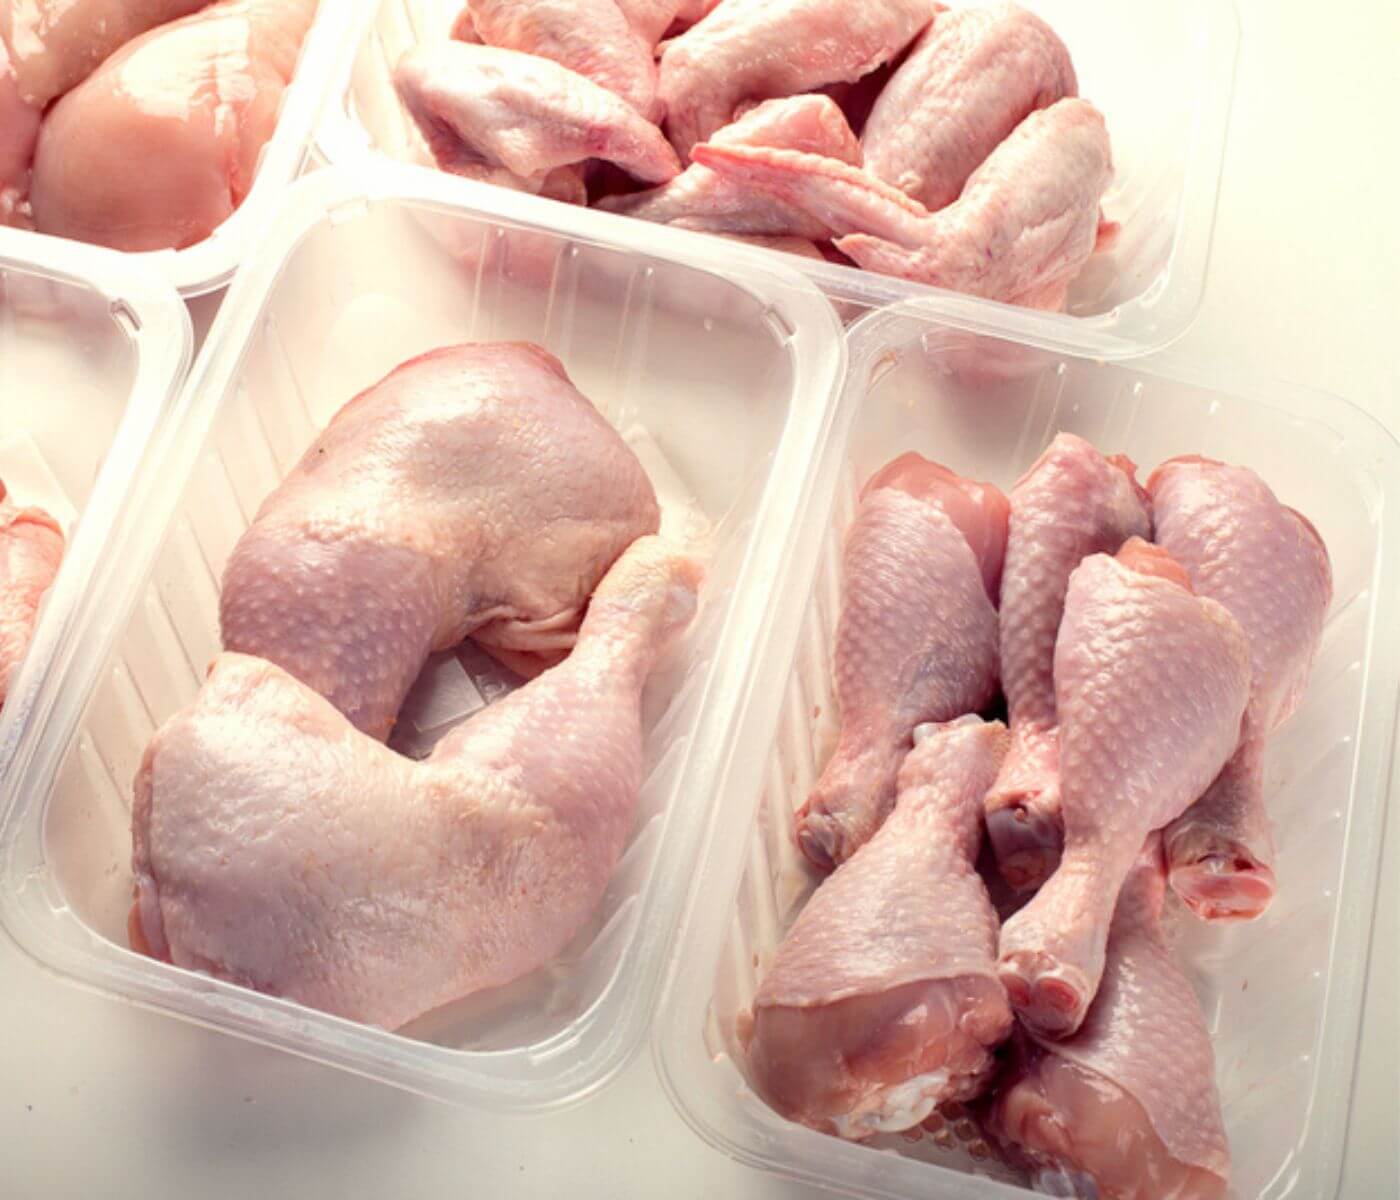 The Philippines will import more chicken than other meats in...